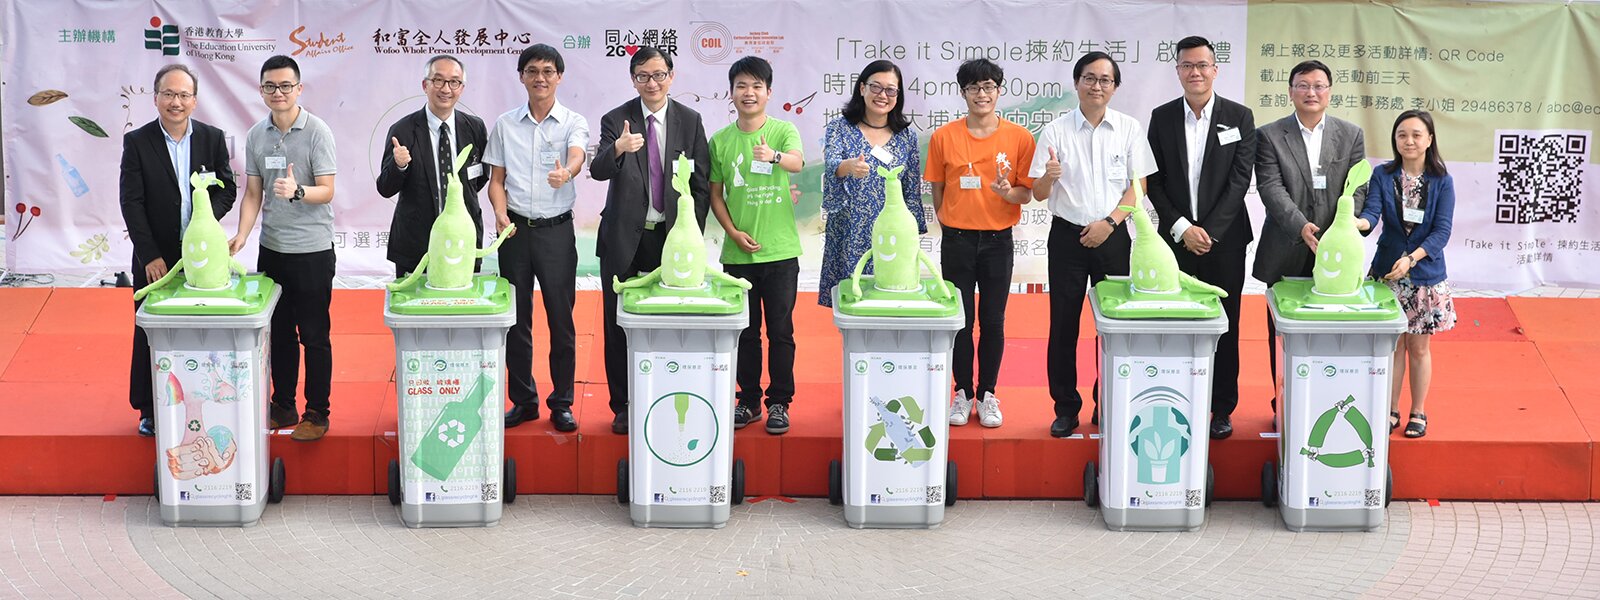 “Take it Simple‧『揀』約生活” Kick-off Ceremony: Staff and Students Turn 500 Waste Glass Bottles into EdUHK Logo